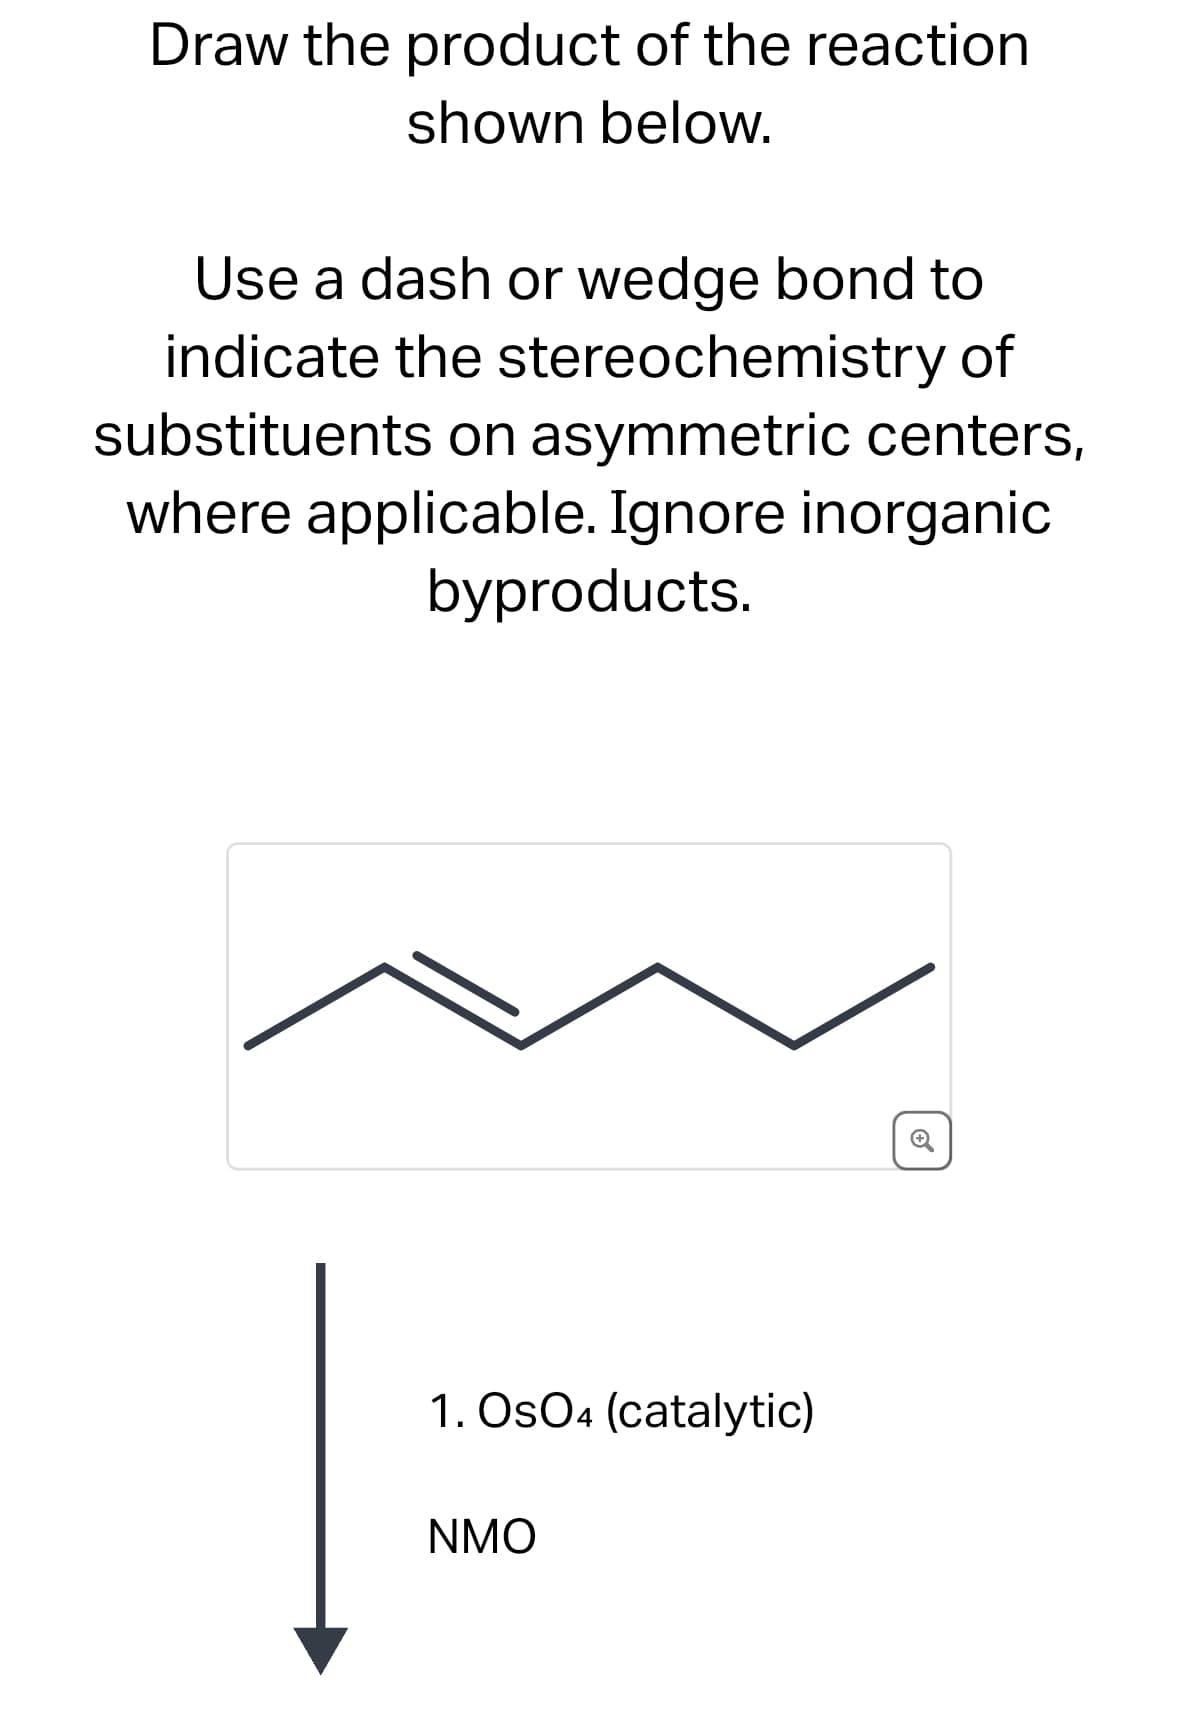 Draw the product of the reaction
shown below.
Use a dash or wedge bond to
indicate the stereochemistry of
substituents on asymmetric centers,
where applicable. Ignore inorganic
byproducts.
1. OsO4 (catalytic)
NMO